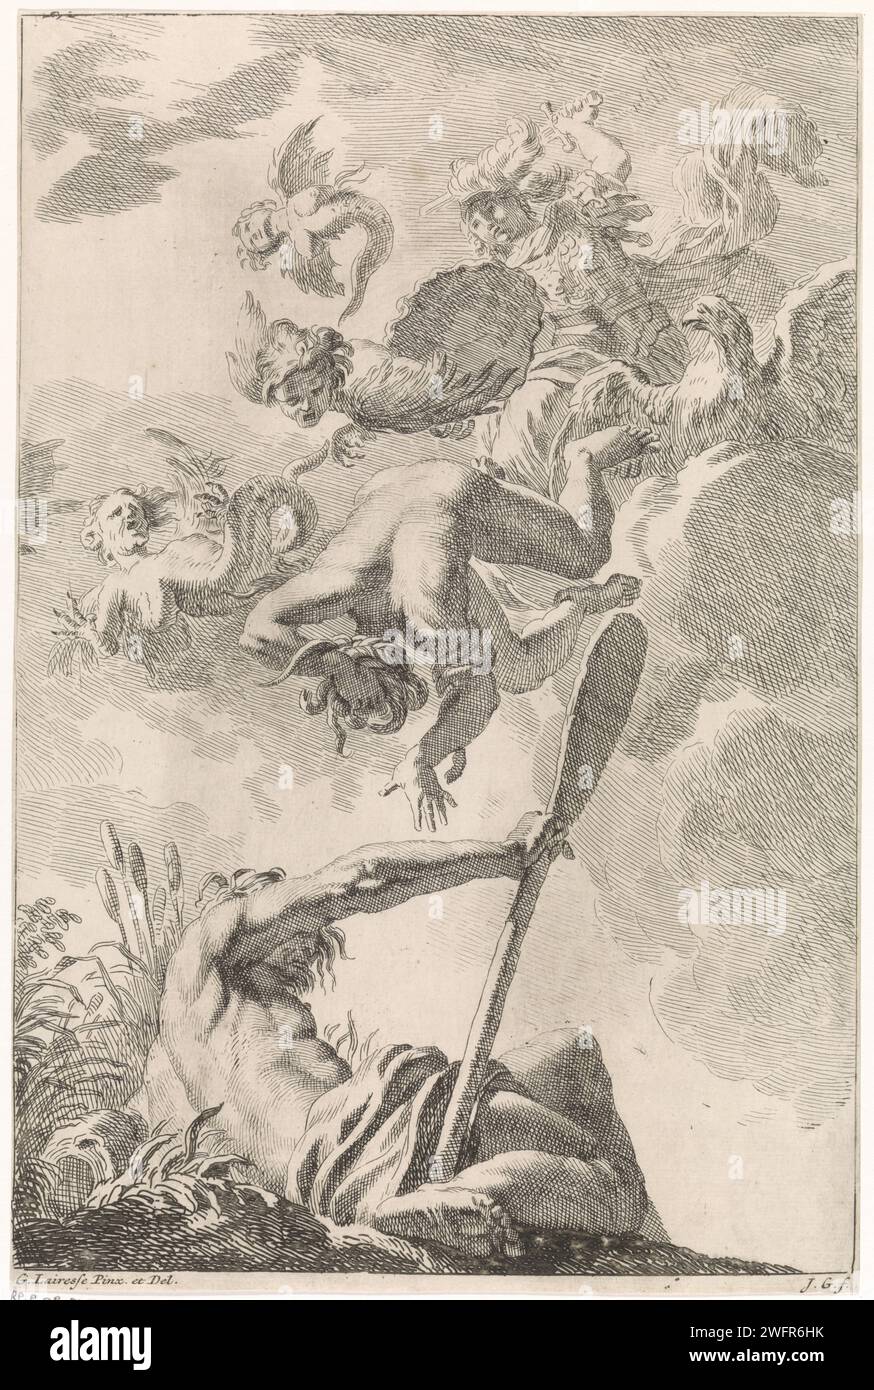 Minerva shifts envy: an allegory by certainty, Johannes Glaber, after Gerard de Lairesse, 1672 - 1726 print The goddess Minerva shifts three harpes and the personification of envy from heaven. In the foreground the personification of the river Amstel. The print is to a ceiling painting by Gerard de Lairesse and is part of a series with Biblical, mythological and allegorical representations. print maker: unknownpublisher: Amsterdam paper etching (story of) Minerva (Pallas, Athena). Envy; 'Invidia' (Ripa)  personification of one of the Seven Deadly Sins. river personified, 'Fiumi' (Ripa). Harpi Stock Photo